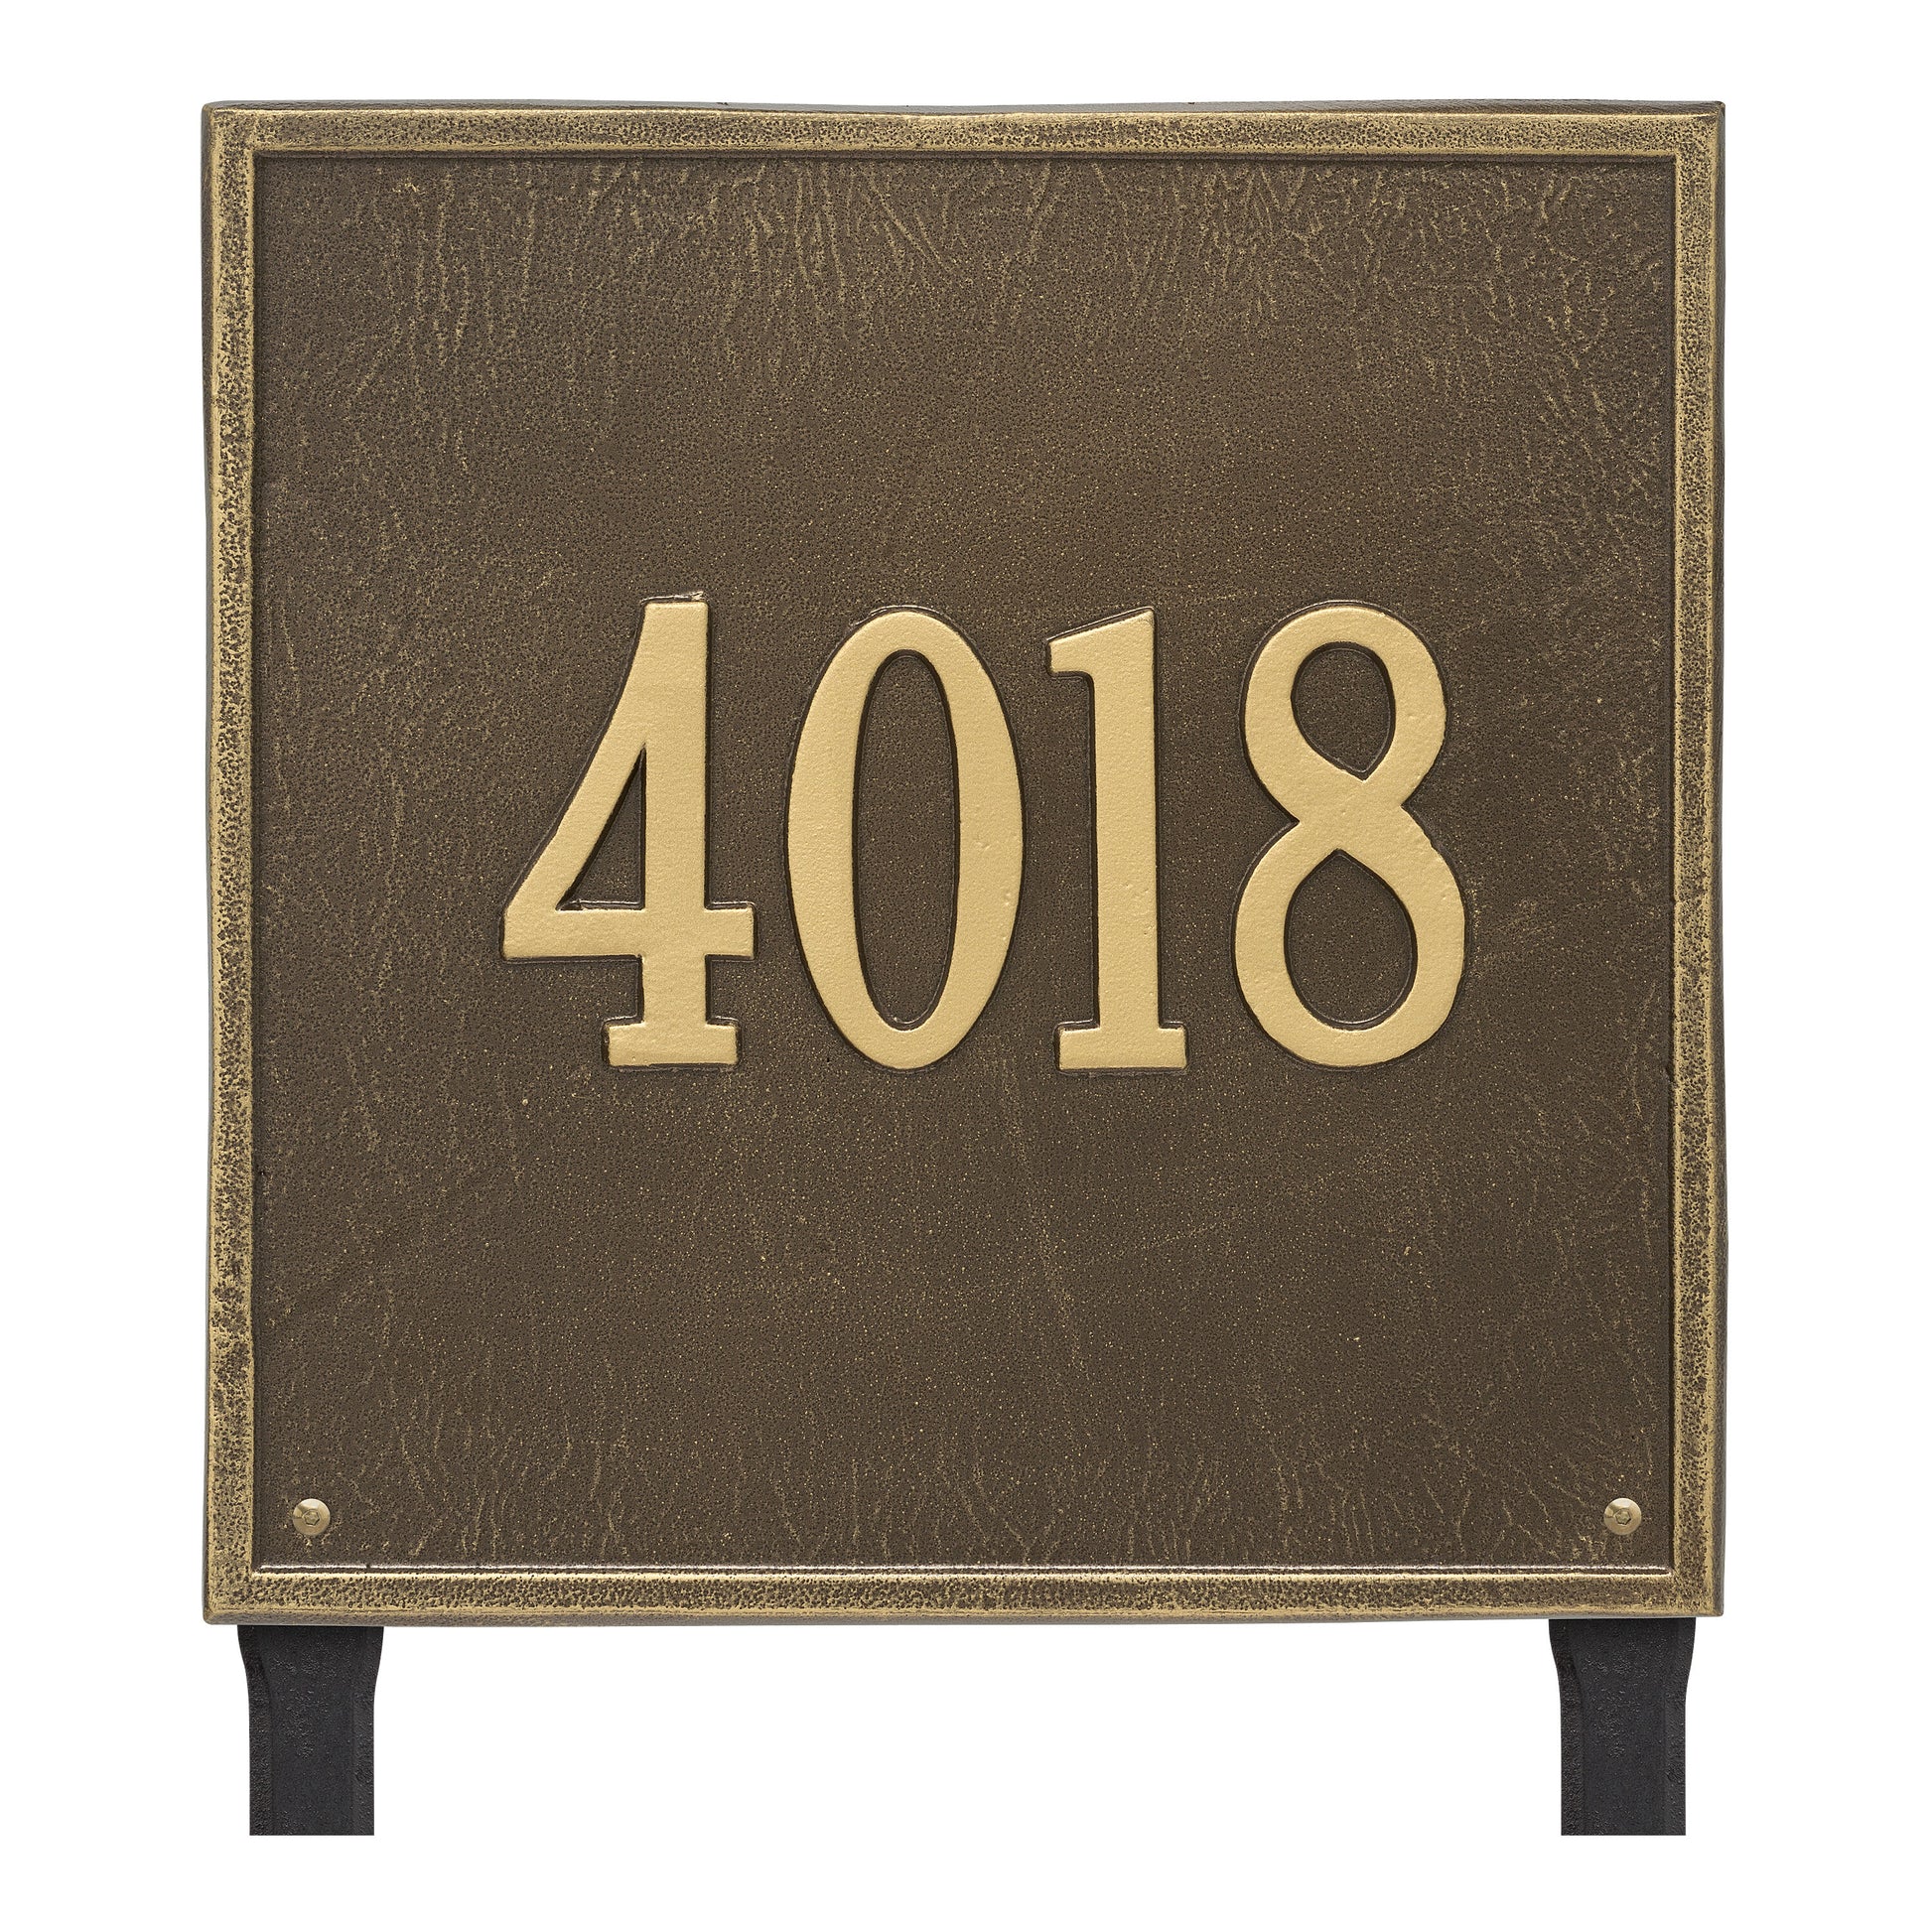 Whitehall Products Personalized Square Estate Lawn Plaque One Line Antique Copper